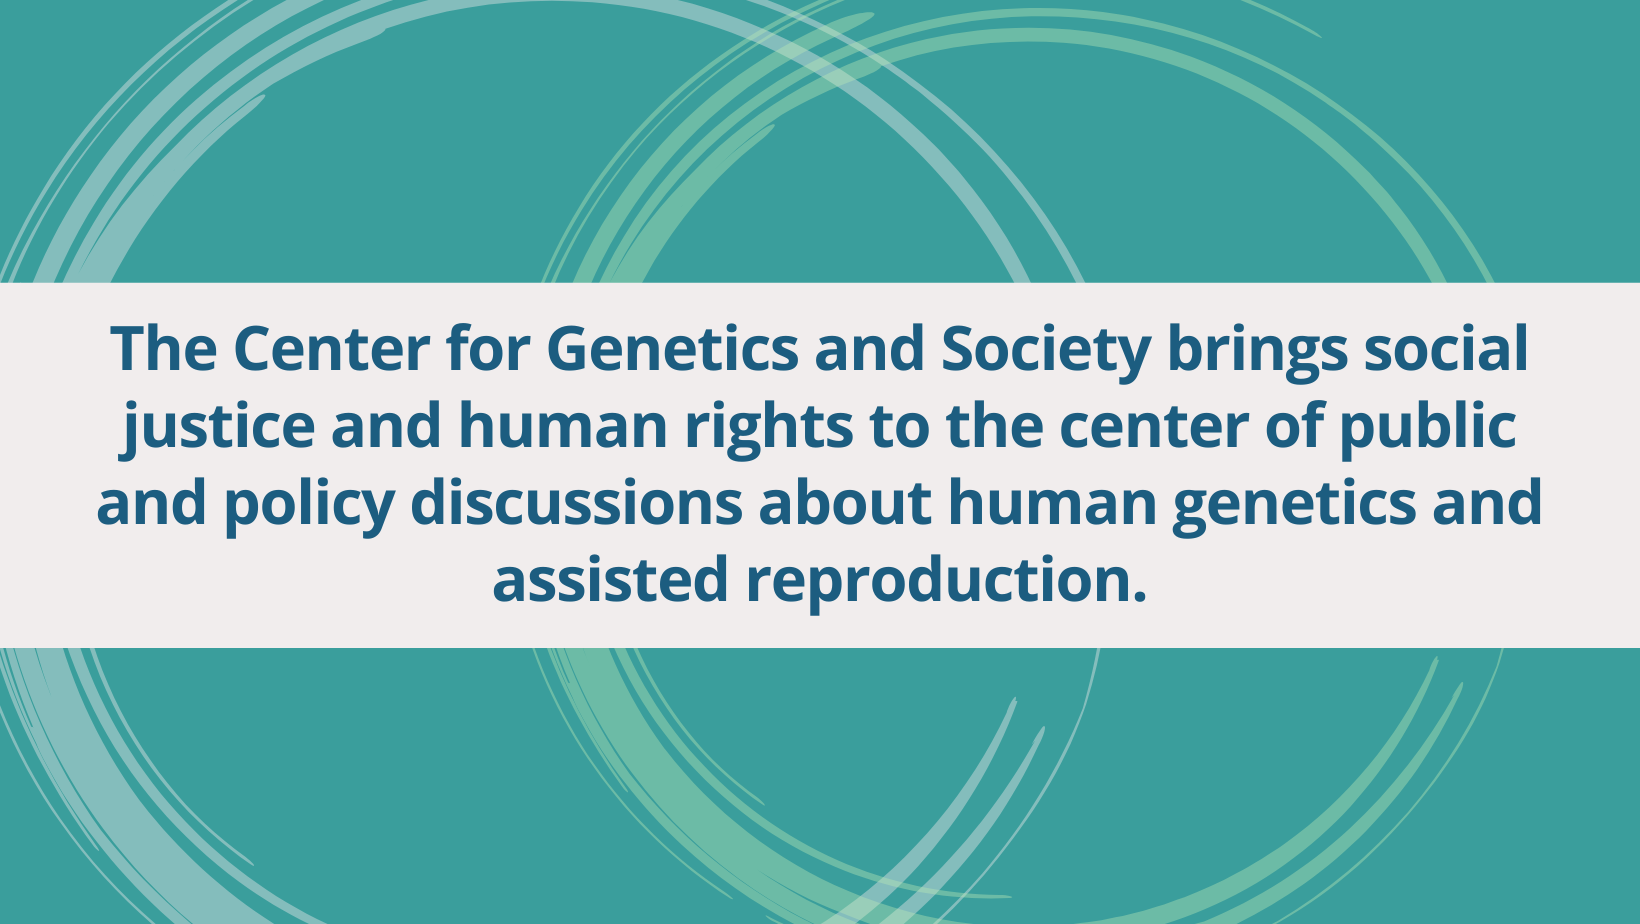 The Center for Genetics and Society brings social justice and human rights to the center of public and policy discussions about human genetics and assisted reproduction